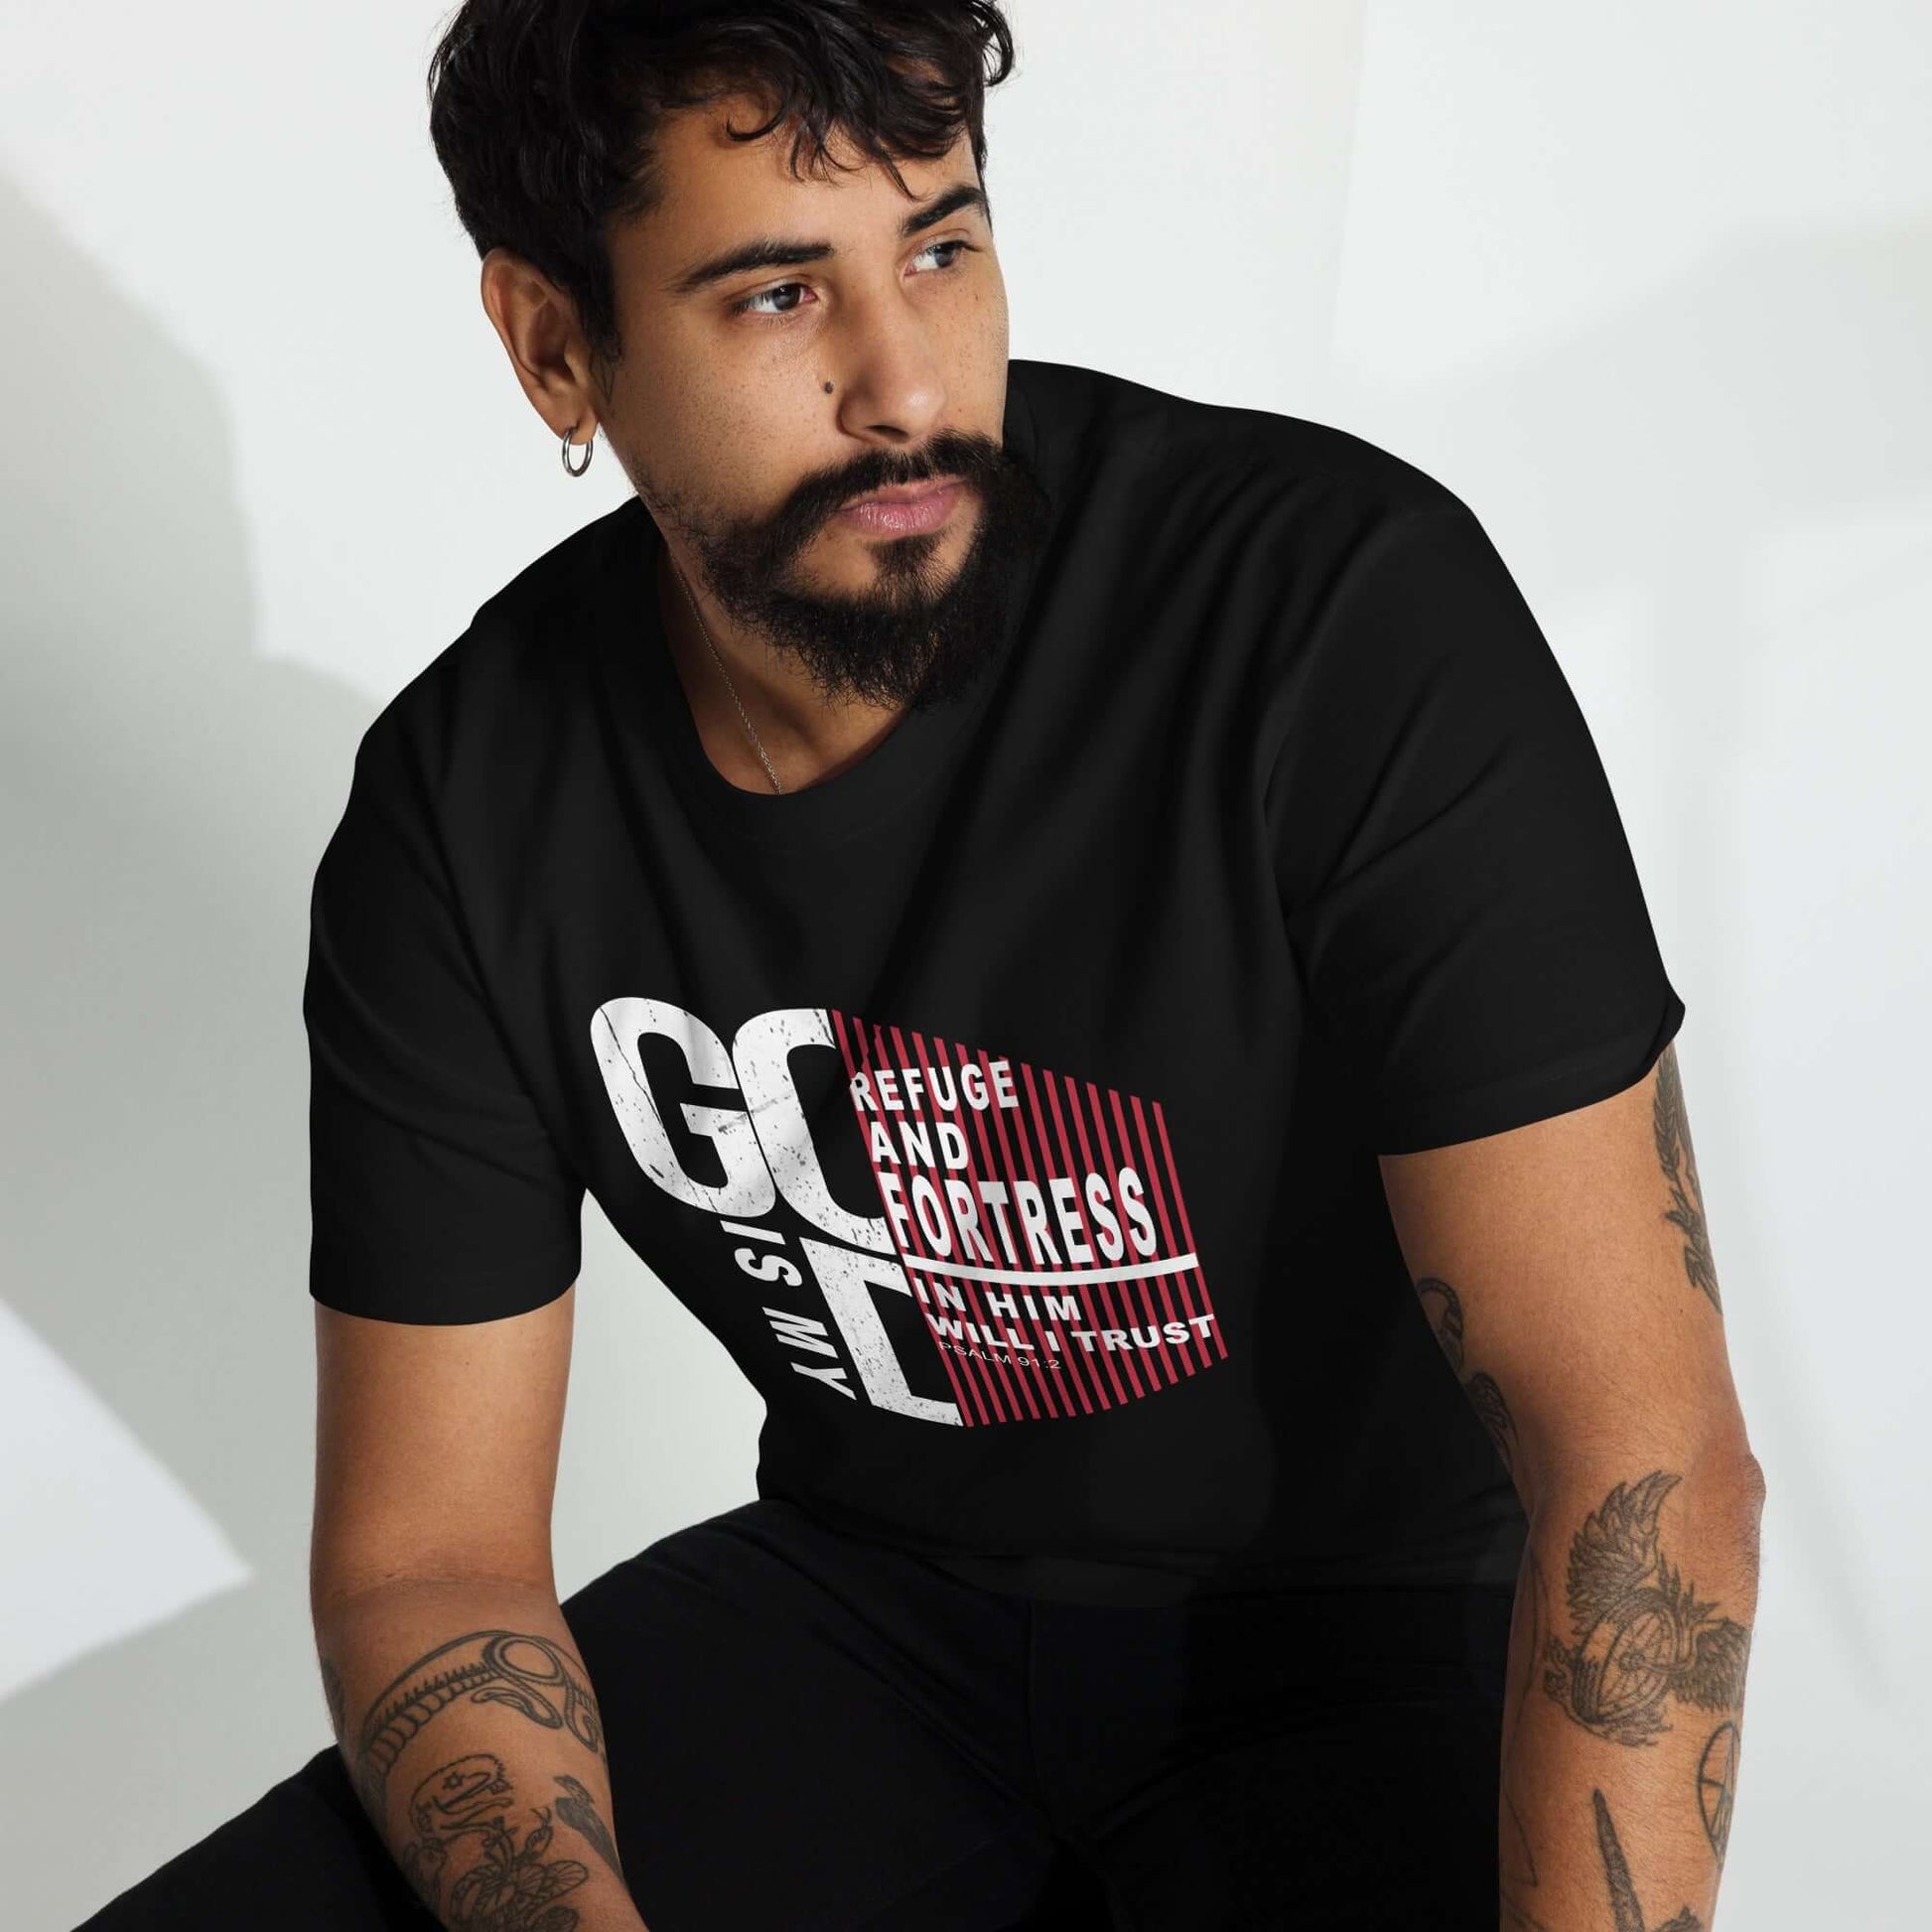 Christian "God is my Refuge and Fortress in Whom I Trust" heavyweight T-shirt